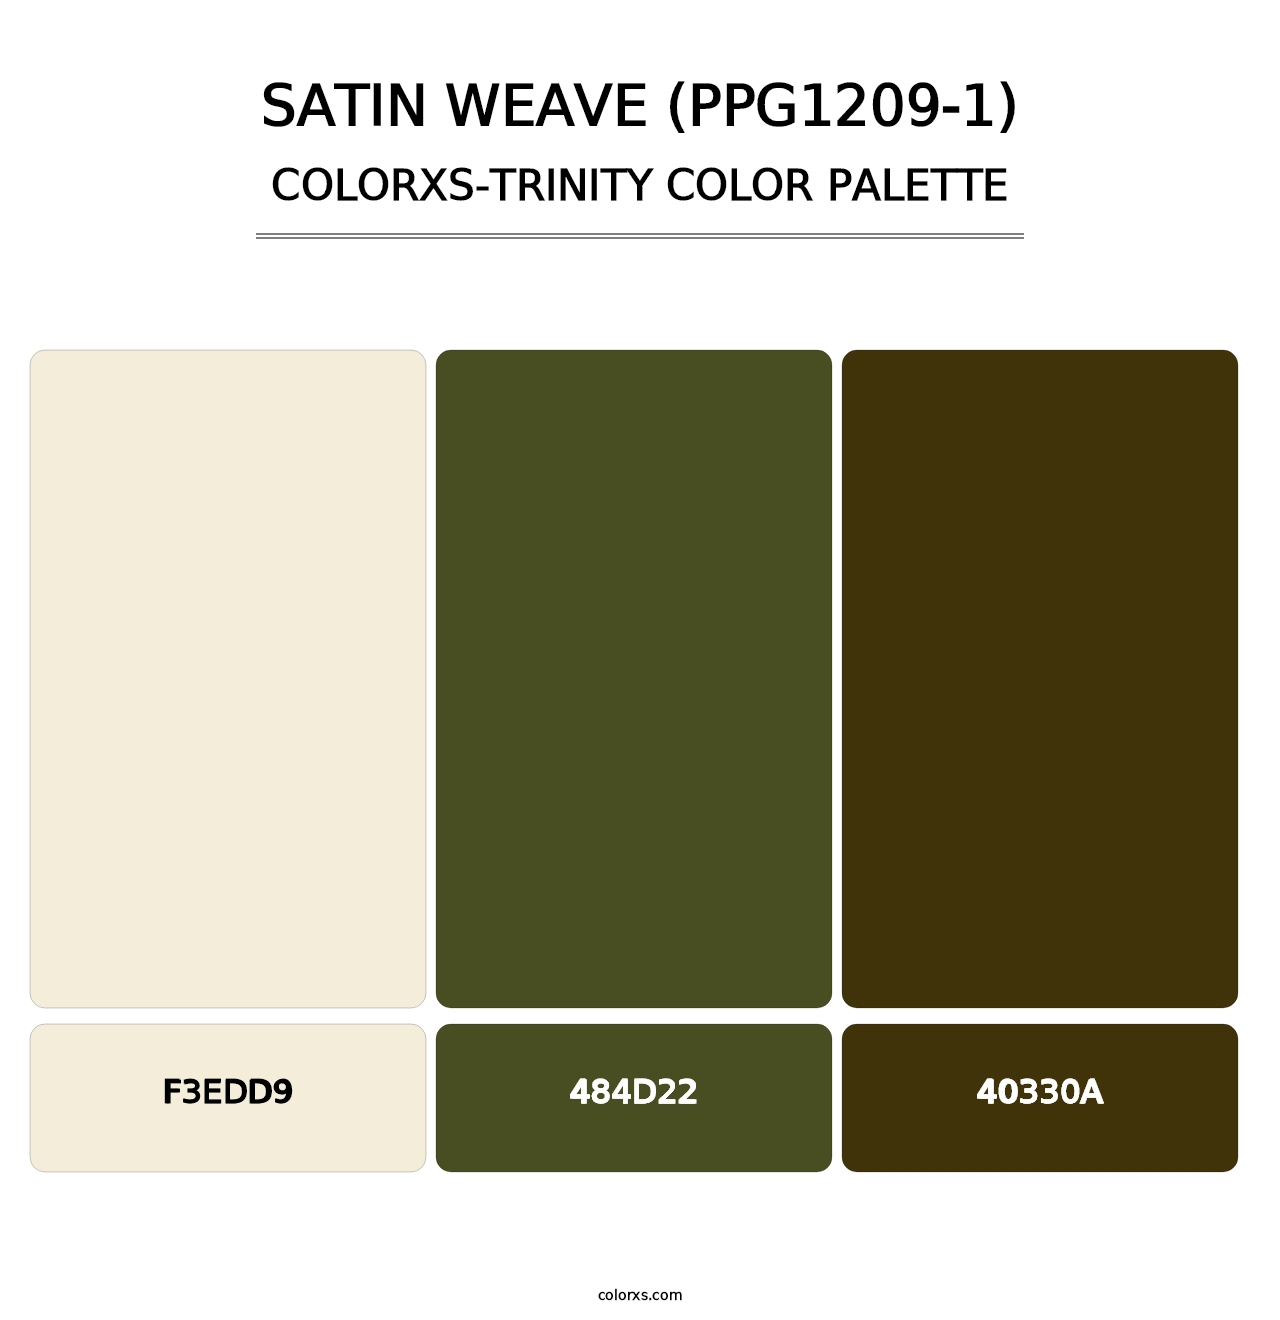 Satin Weave (PPG1209-1) - Colorxs Trinity Palette